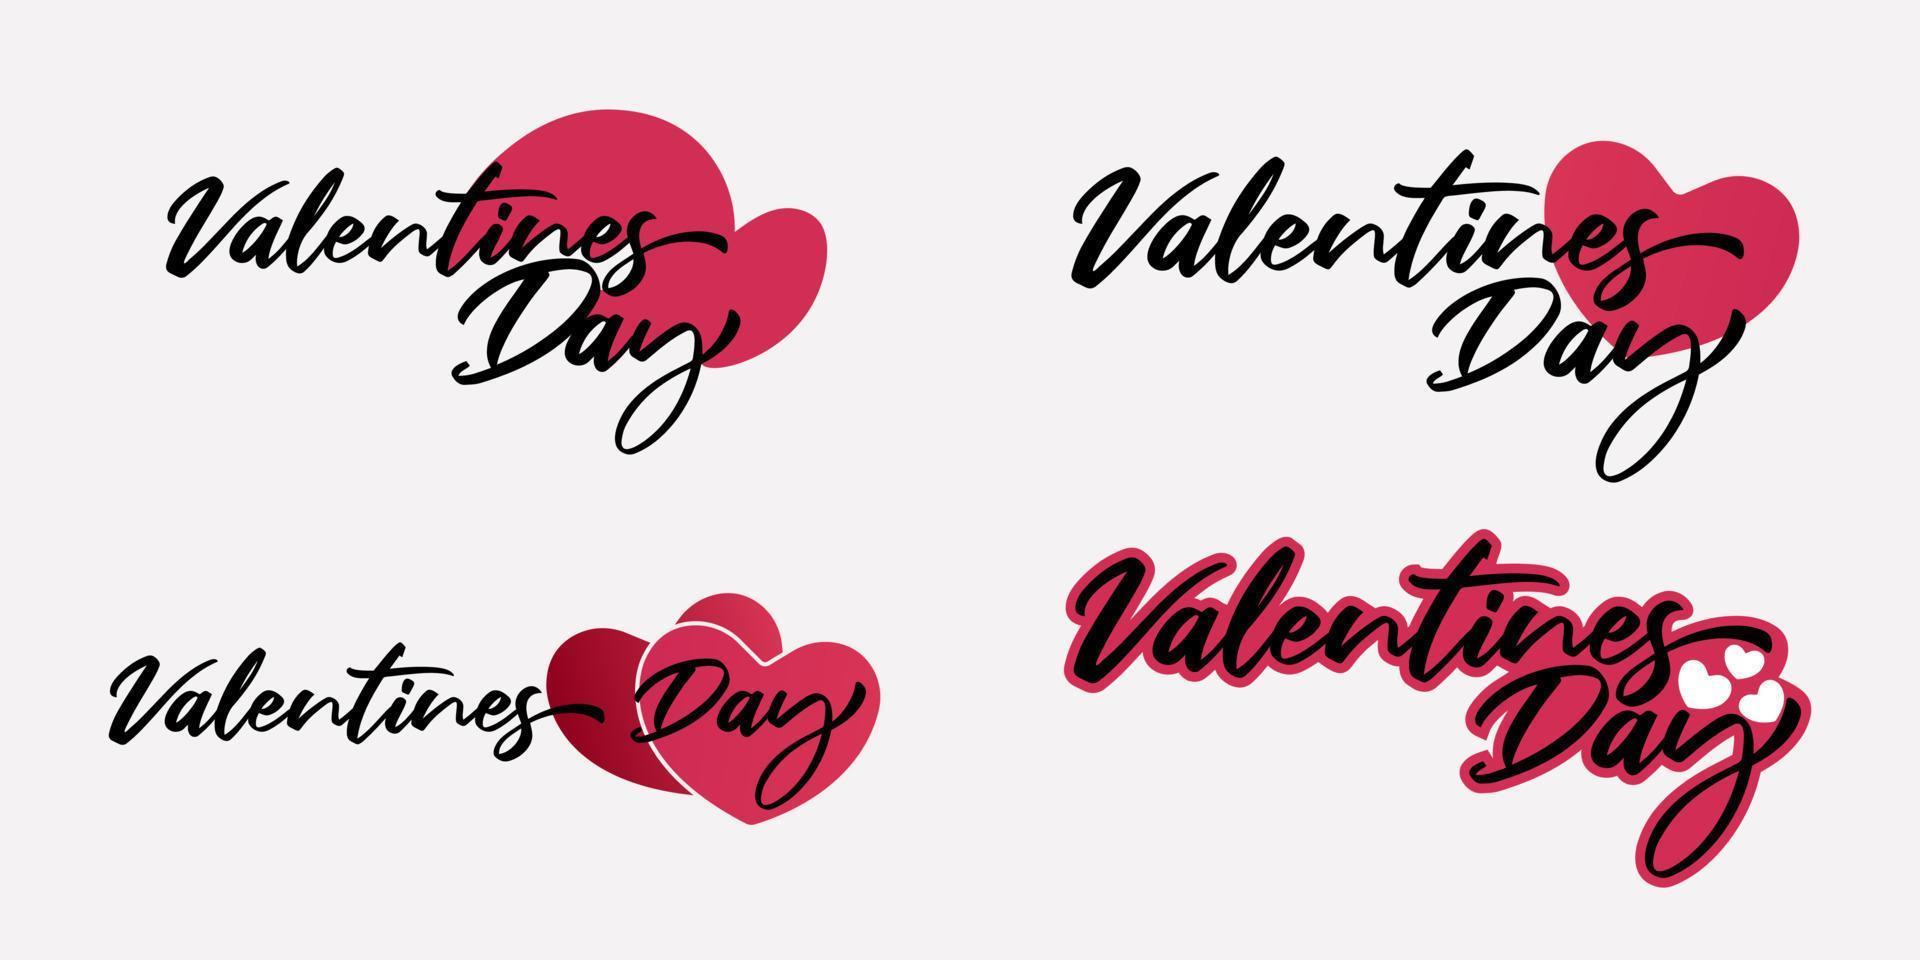 Happy Valentine's Day lettering text set isolated on white background. Happy Valentine's Day typography vector design for greeting cards and poster, banner.